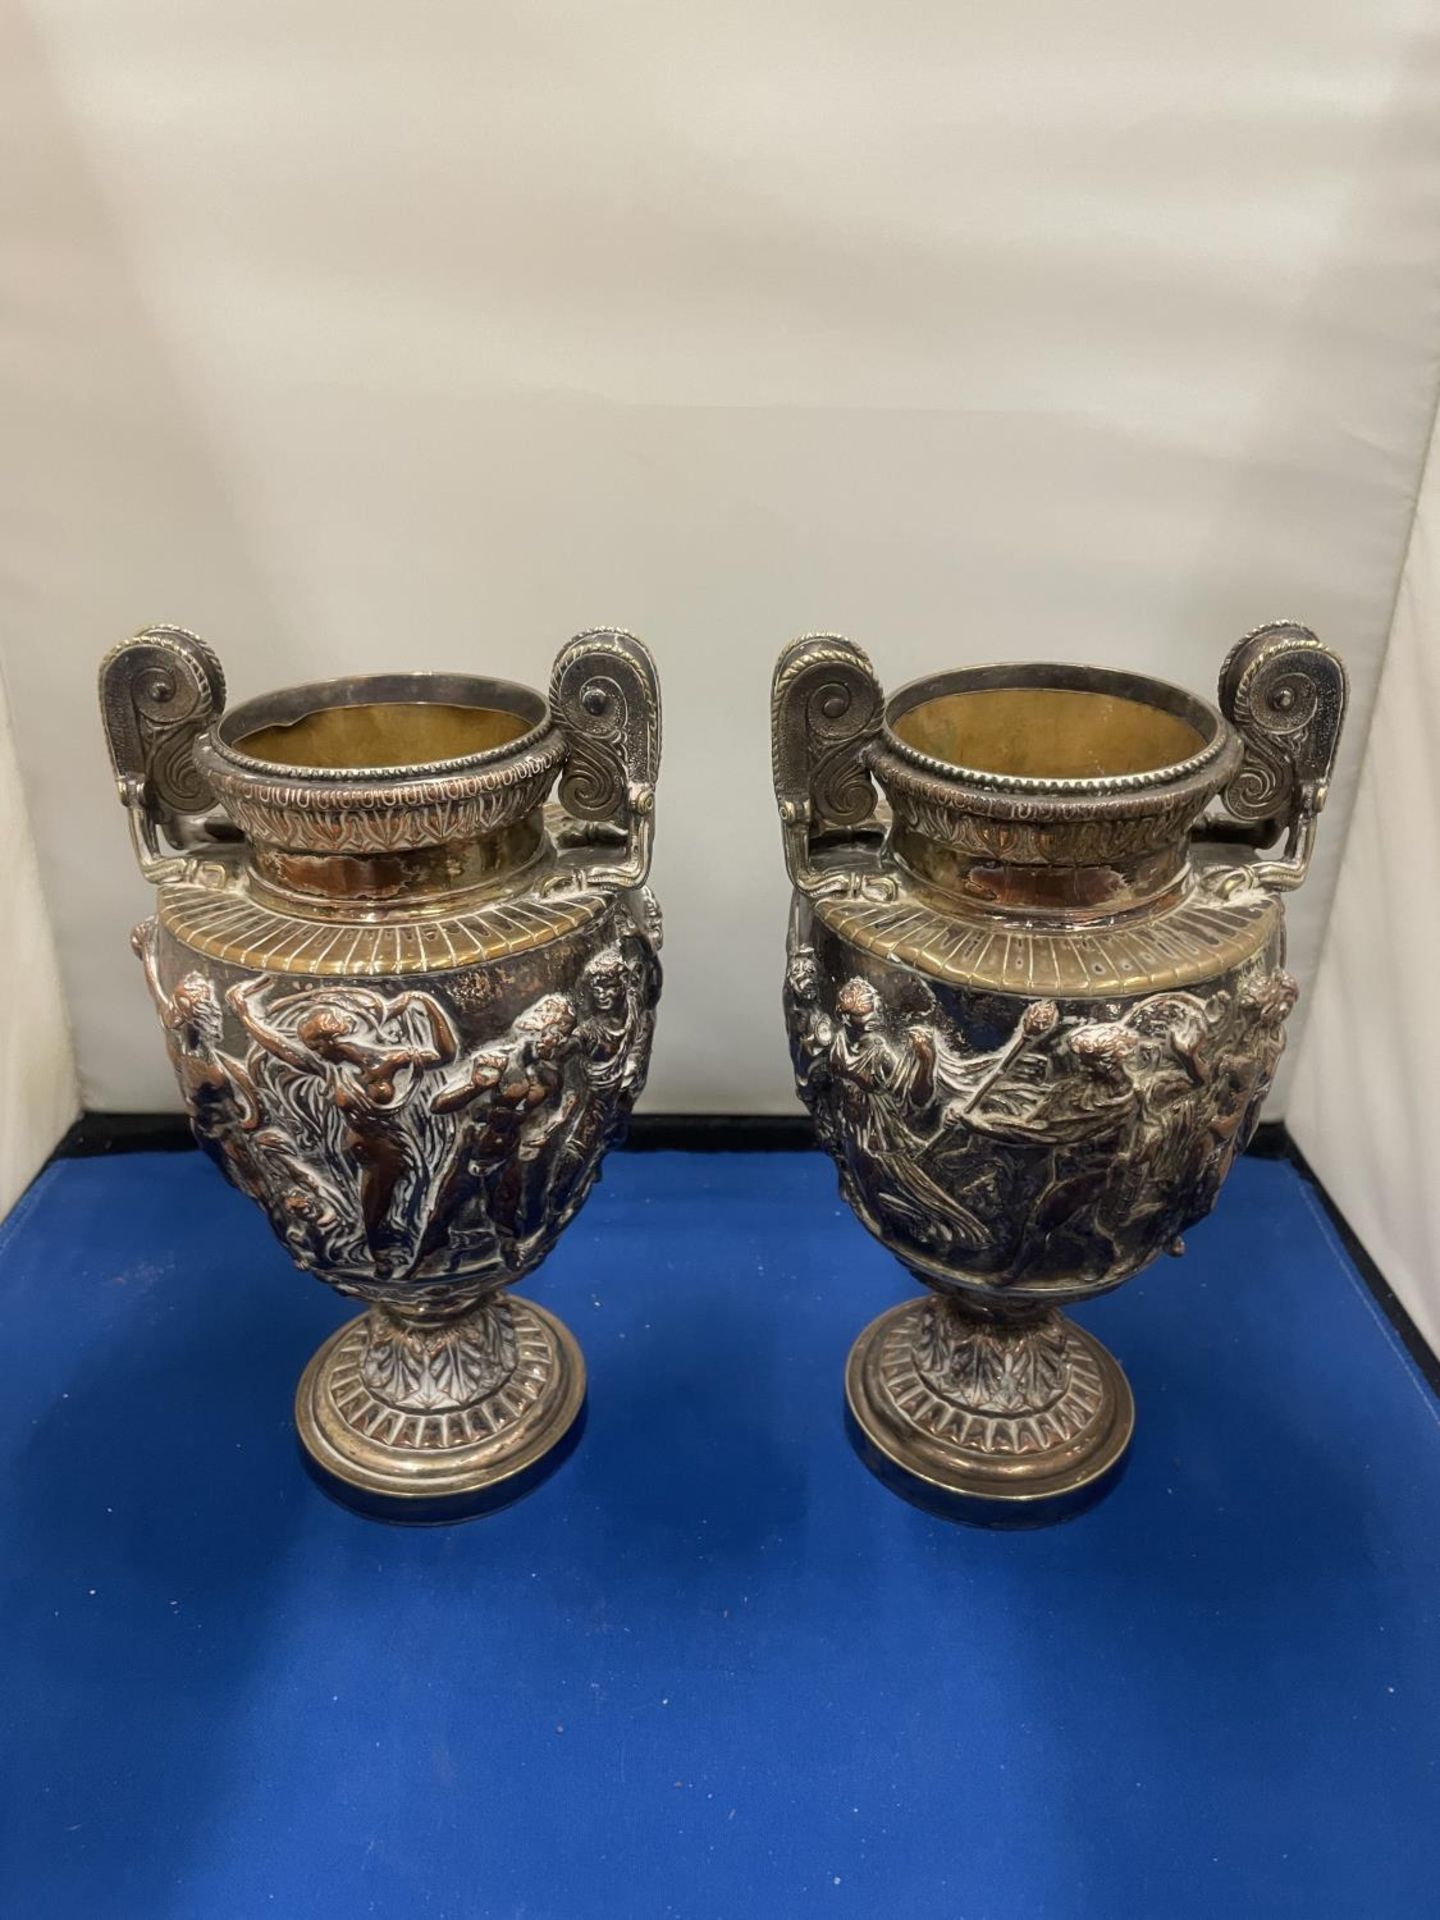 A PAIR OF DECORATIVE TWIN HANDLED URNS WITH INNER LINERS HEIGHT 18CM